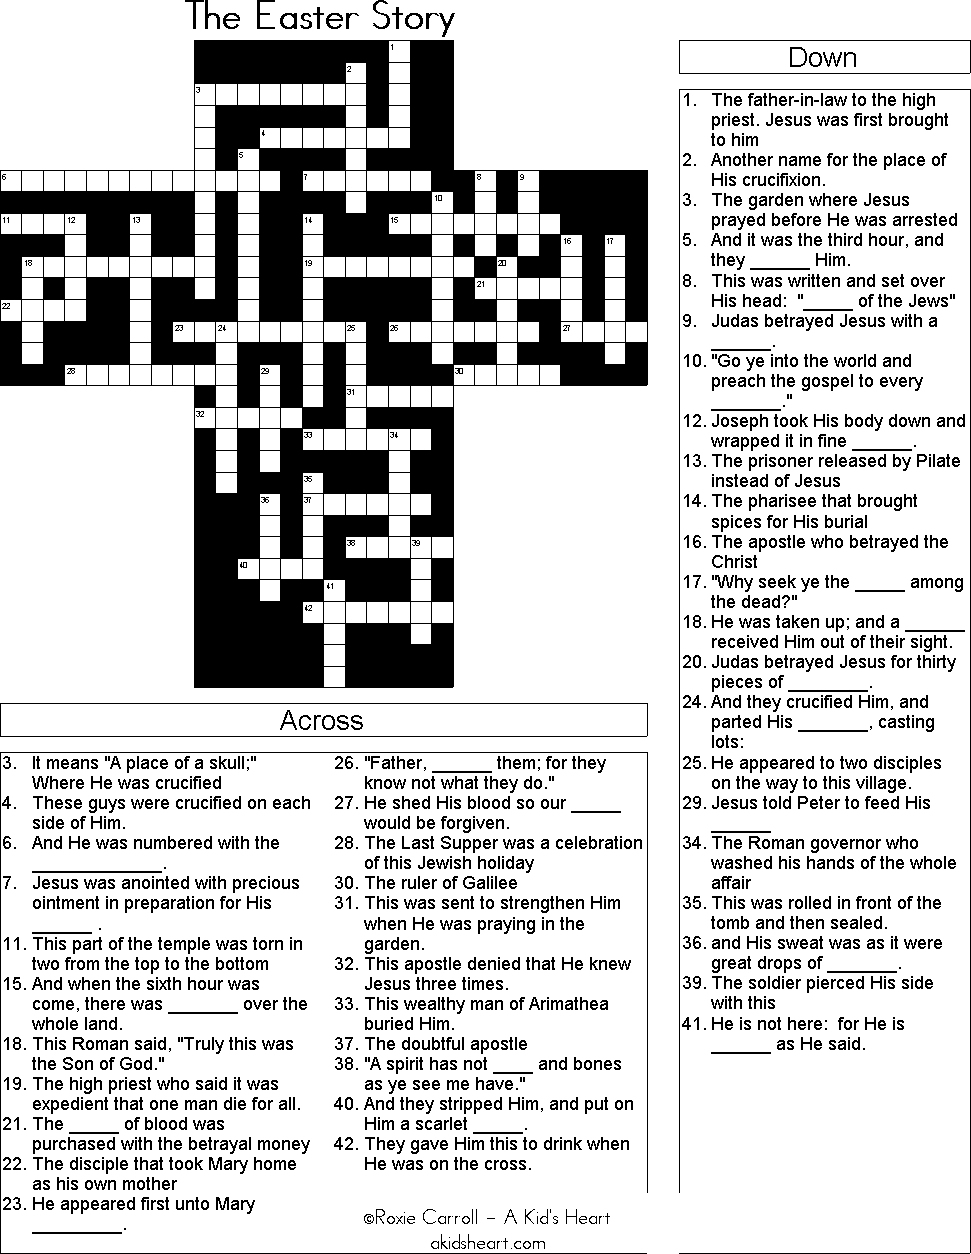 Bible Crossword Puzzles Printable With Answers (89+ Images In - Printable Bible Crossword Puzzles For Adults